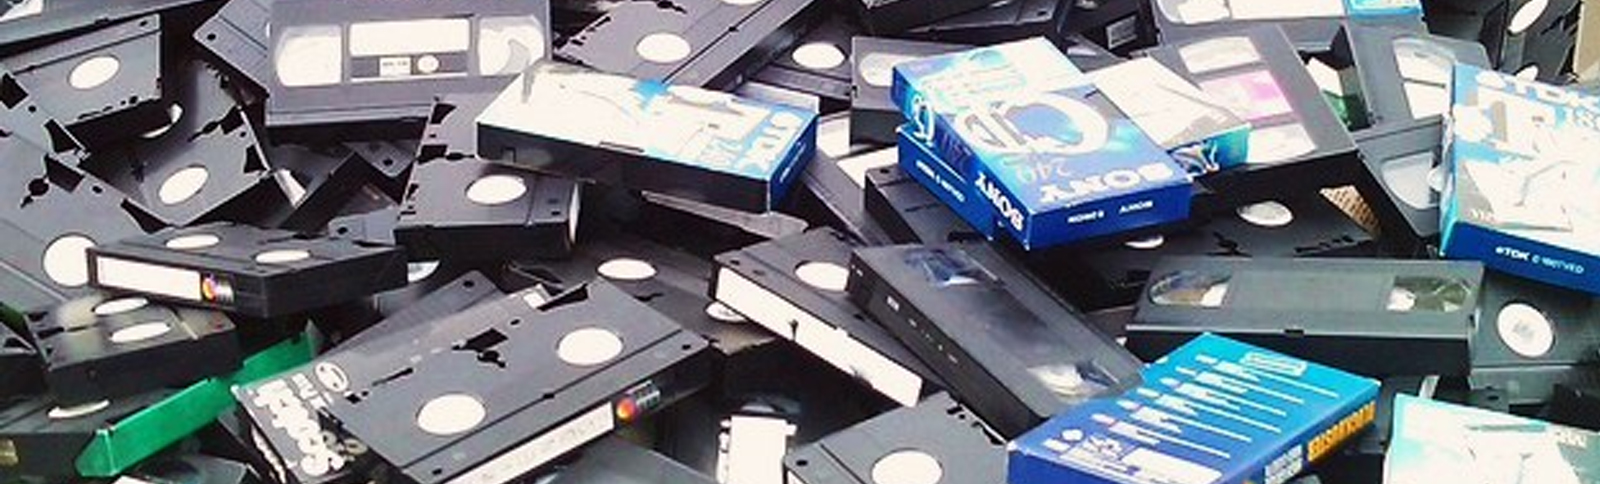 omvendt smugling Abnorm Converting Family Video VHS Tape to DVD and MPEG4 - We Transfer All Video  Tape Formats in Oxford UK | Video Tape Conversions Oxfordshire UK, VHS  Tapes, SVHS Tapes to DVD, VHS-C